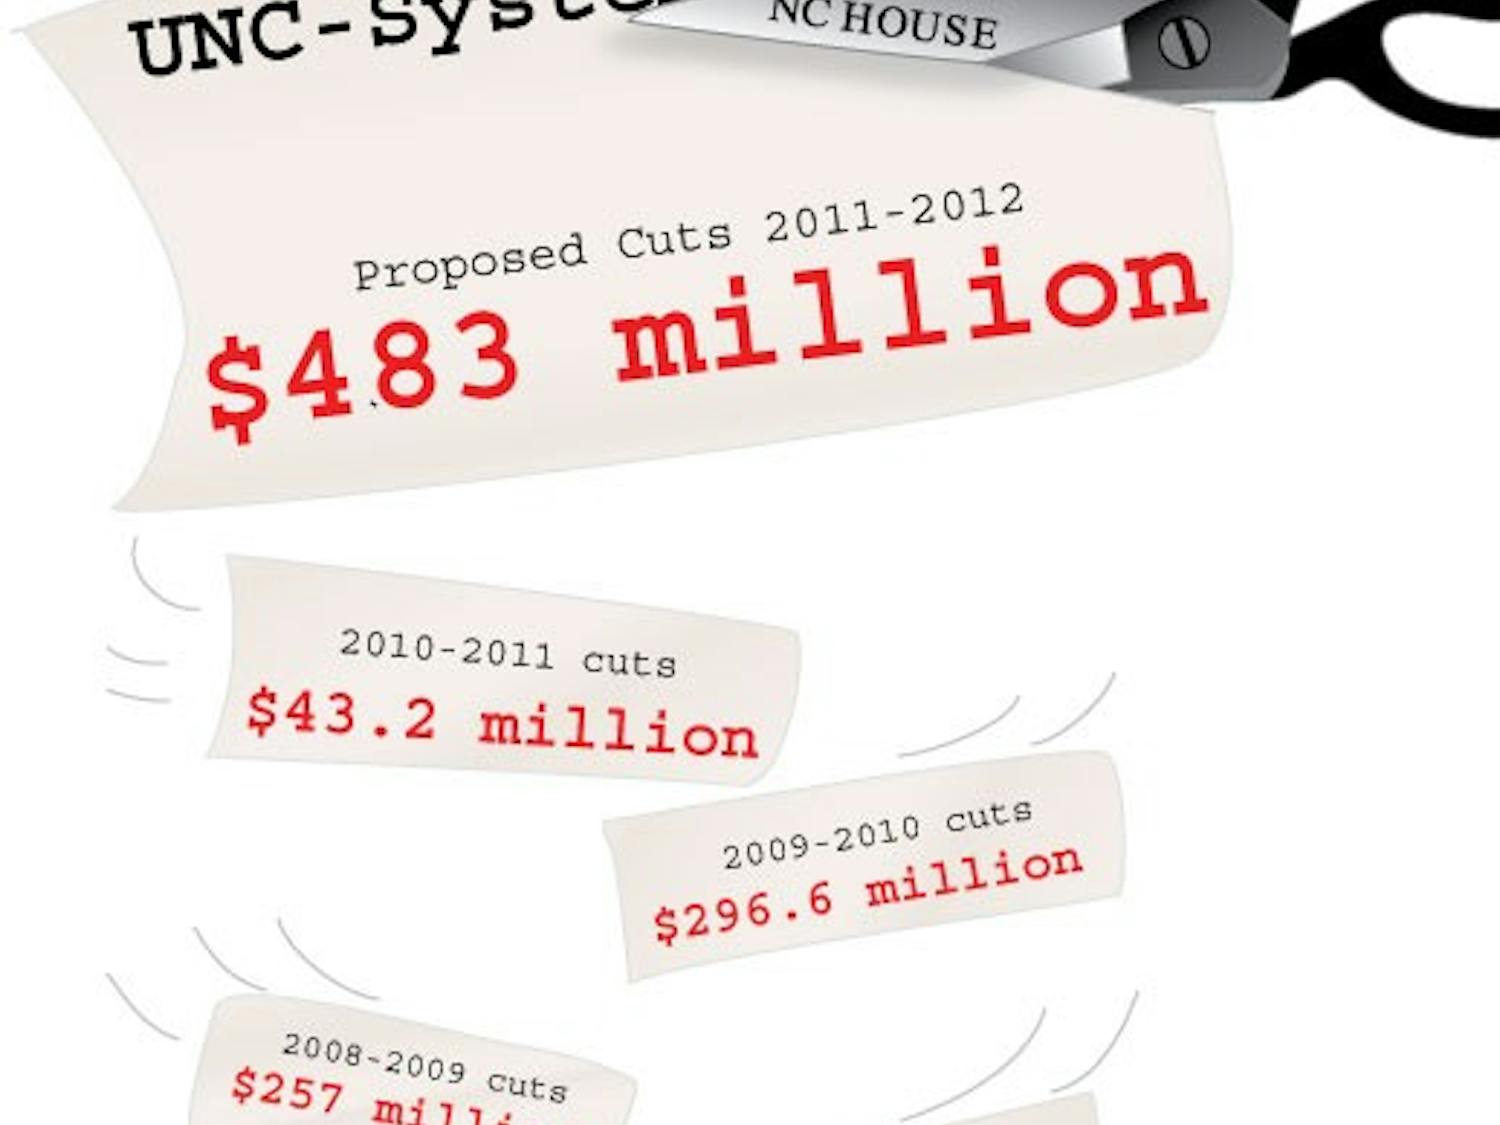 	The N.C. House appropriations subcommittee on education released a budget proposal Tuesday, reducing the University system’s budget for the upcoming fiscal year by $483 million. The system has lost more than $600  million in state funding in the last four years. Last year’s $128.4 million cut was offset by a supplemental tuition increase, making the final reduction $43.2 million. Legislators will vote on the final cut for the system this summer.